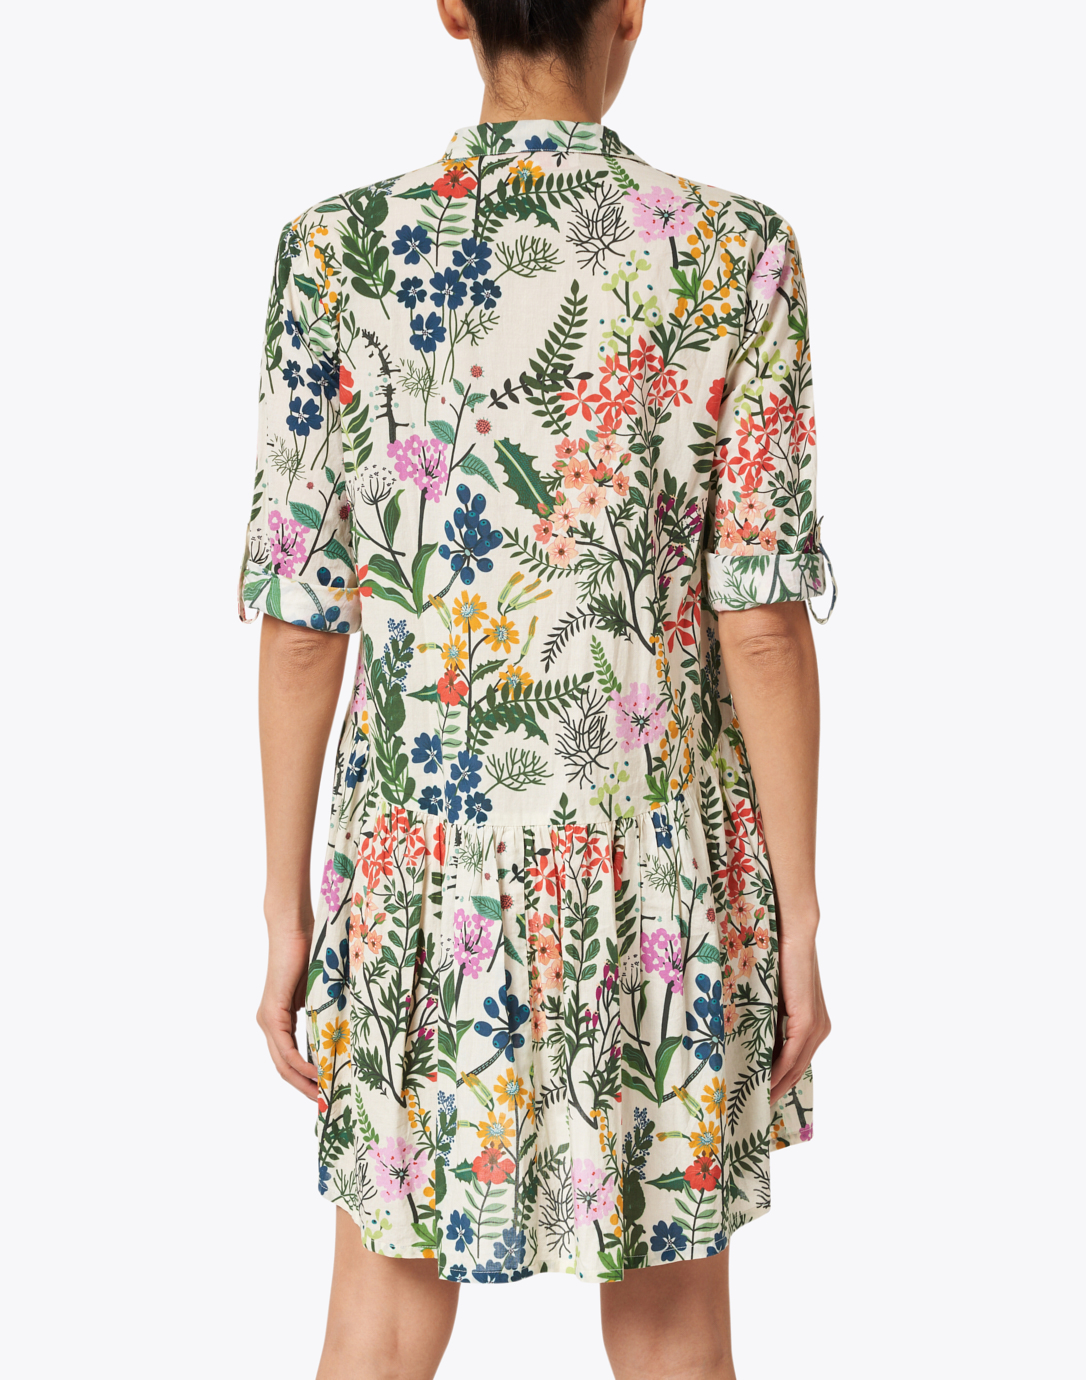 Deauville Multicolored Floral Printed Shirt Dress | Ro's Garden | Halsbrook